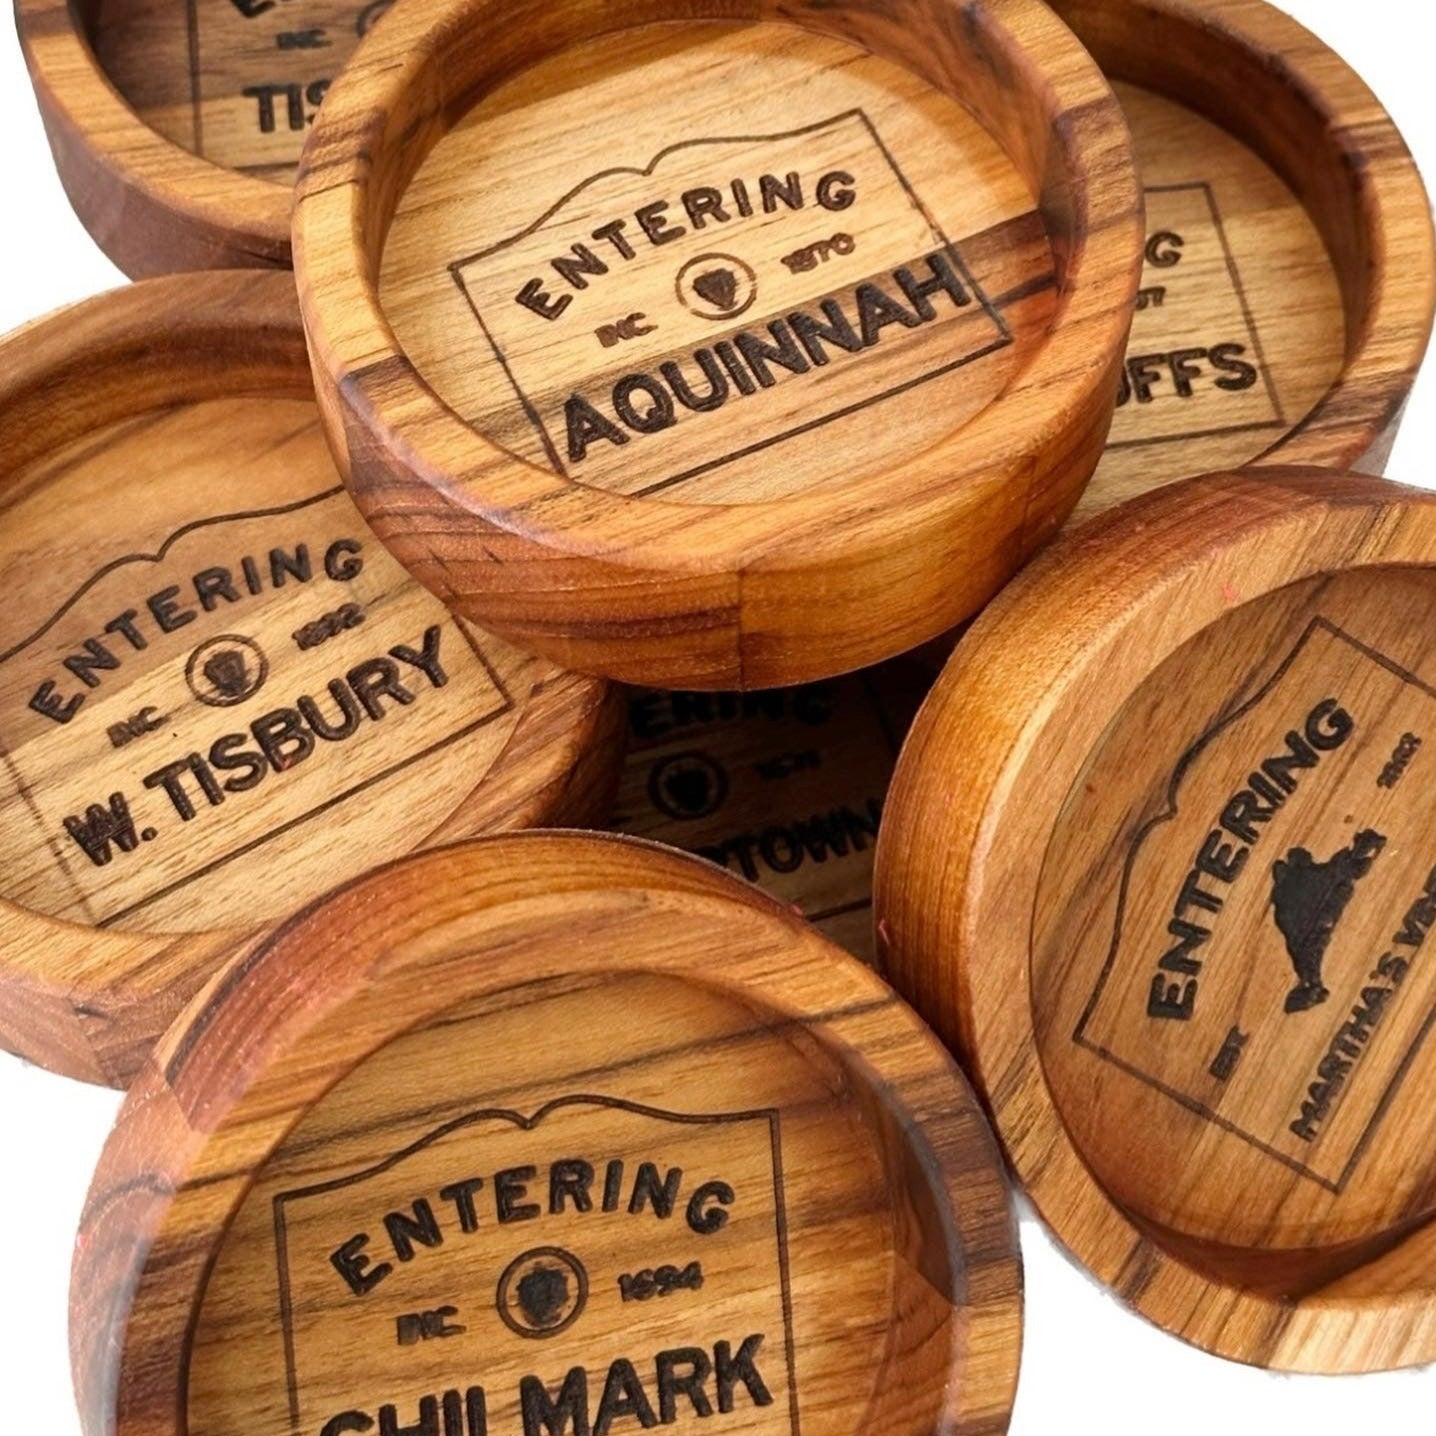 A close-up of a wooden wine coaster showcasing elegant engraving